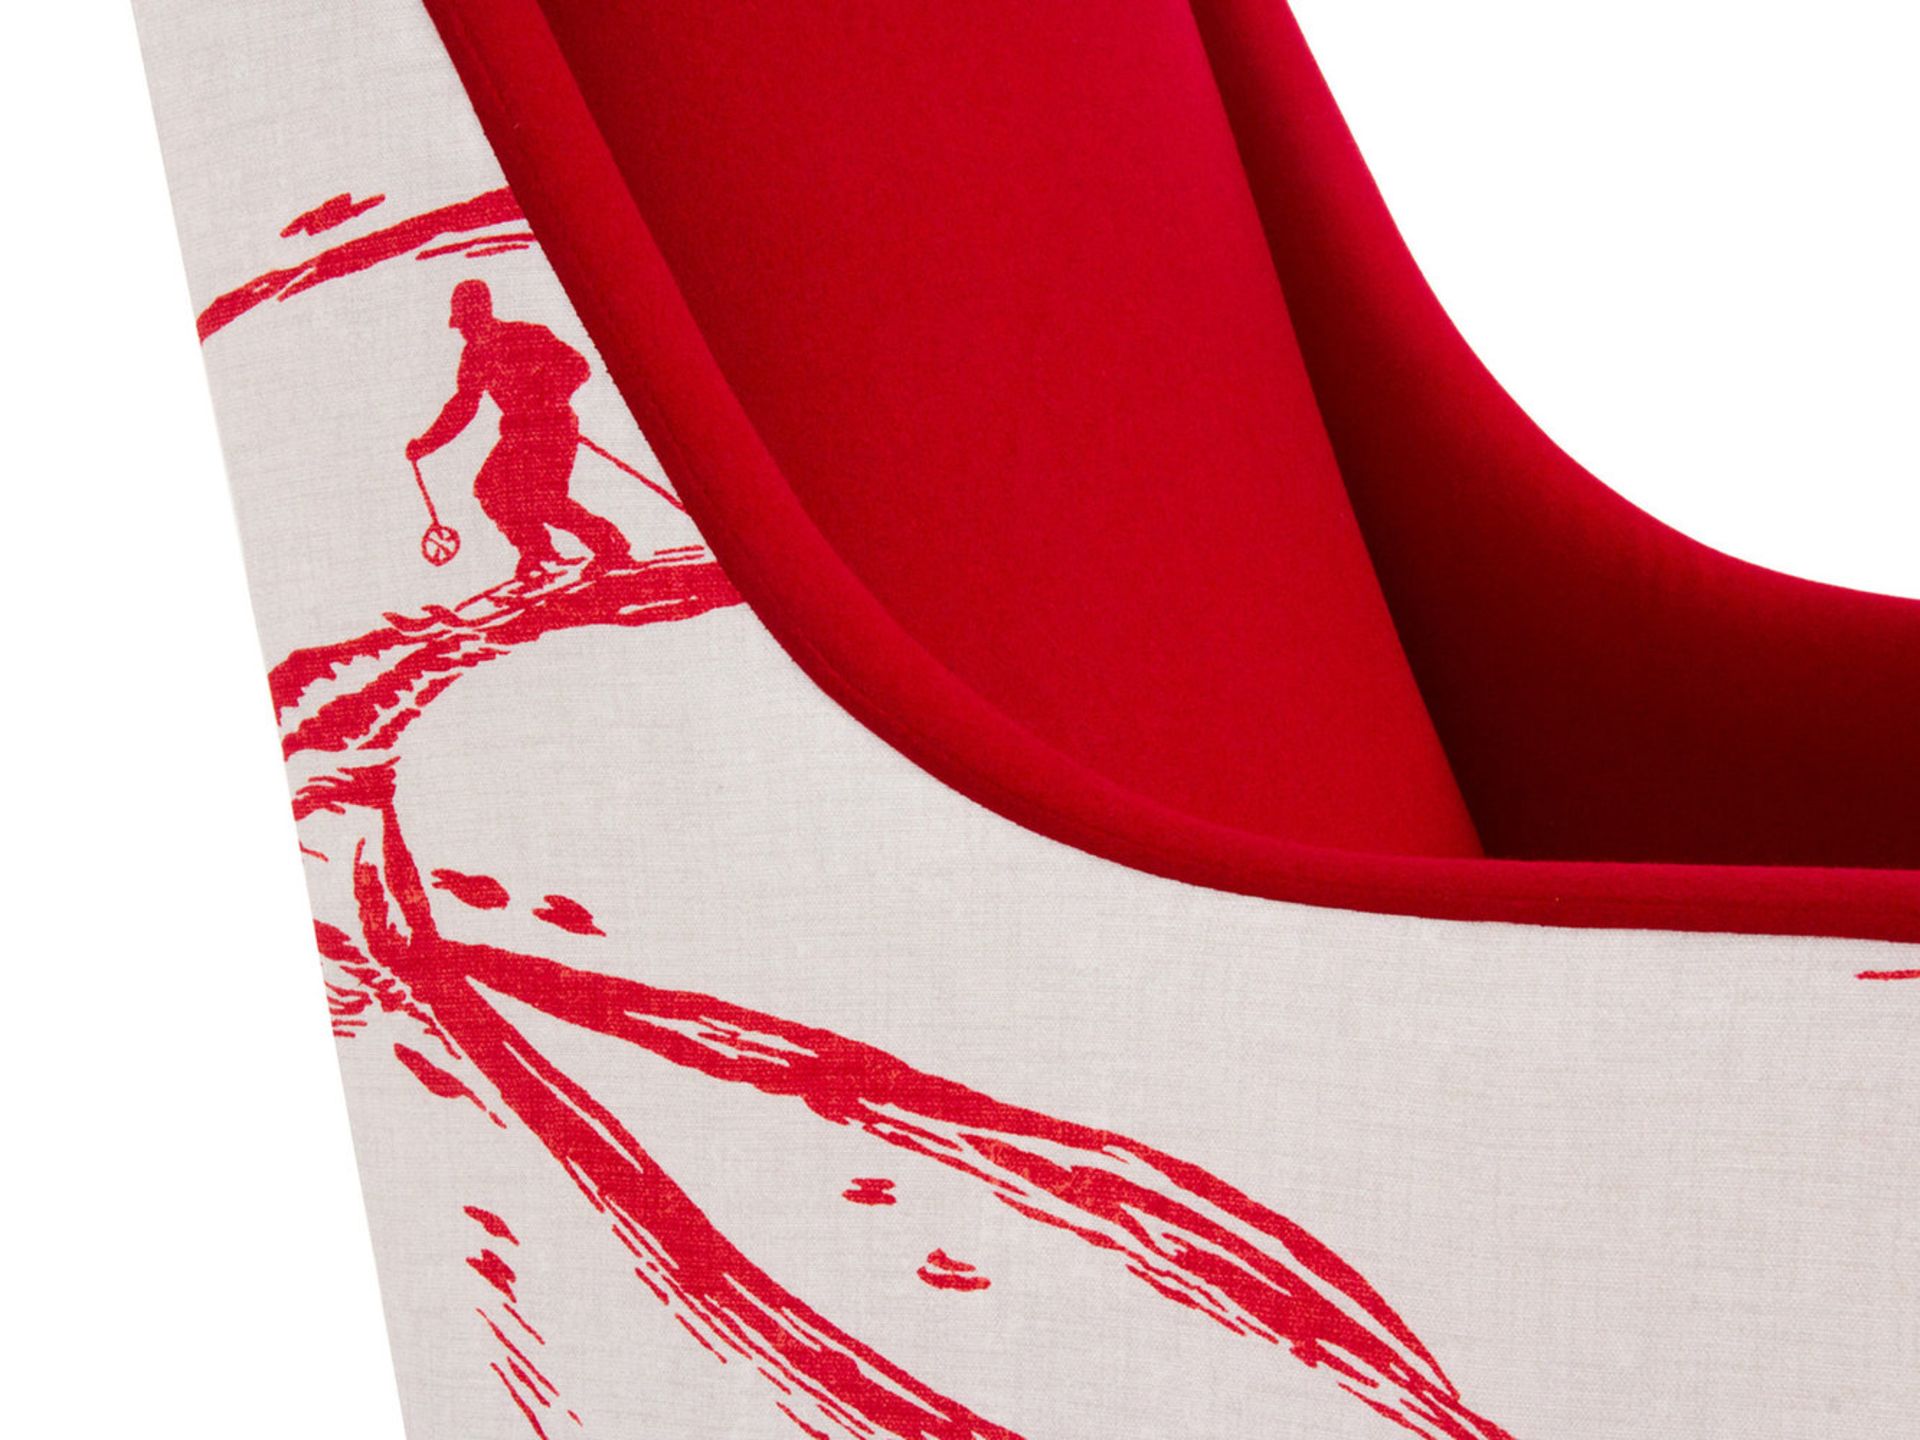 1 x Lauran Armchair Upholstered in Aviemore Skiing Fabric in Red and White - RRP £779! - Image 4 of 7